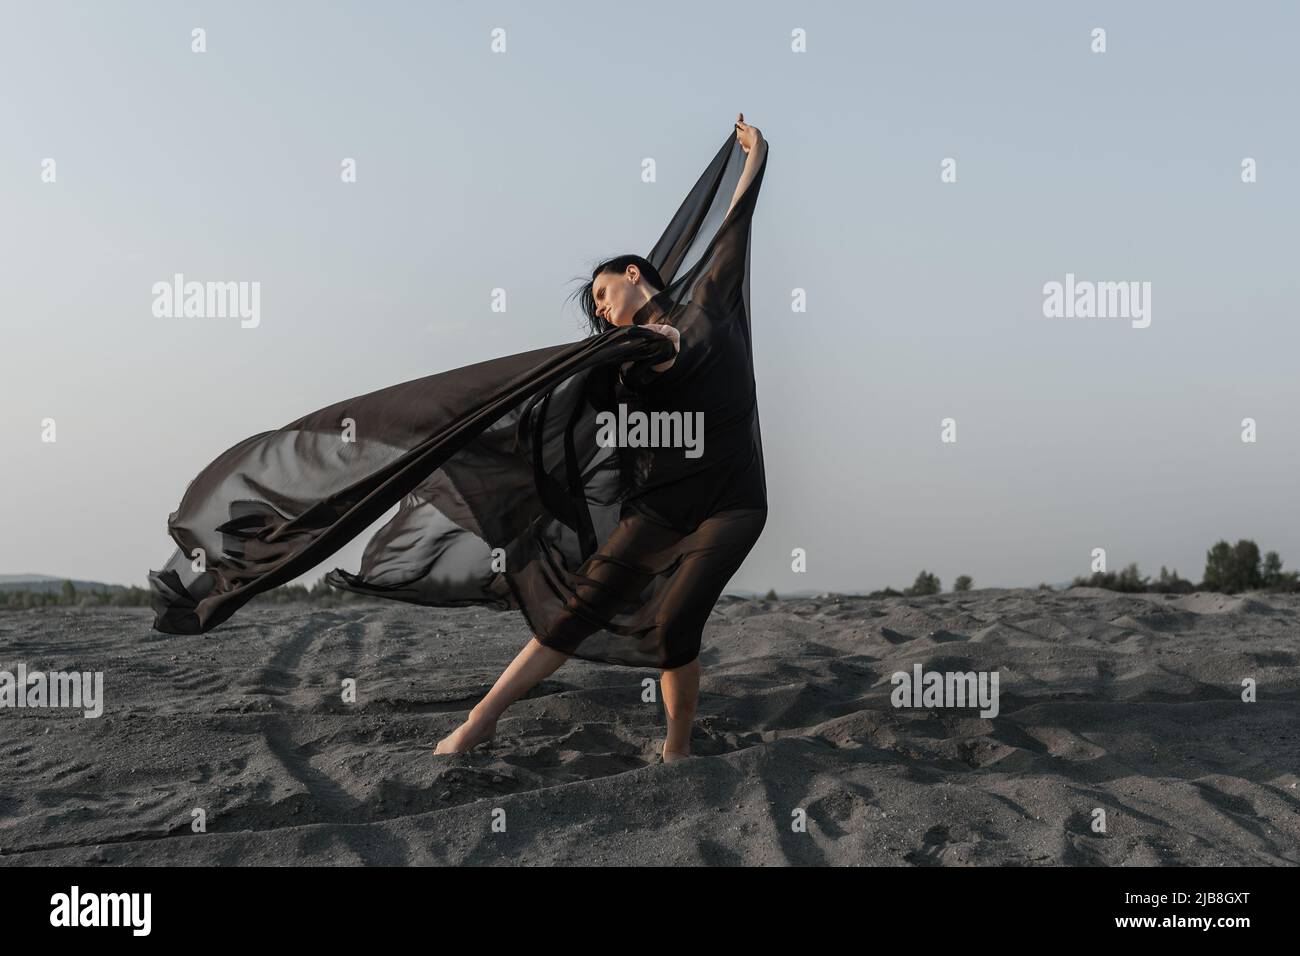 Woman in black with flying fabric dancing on the sand dune Stock Photo